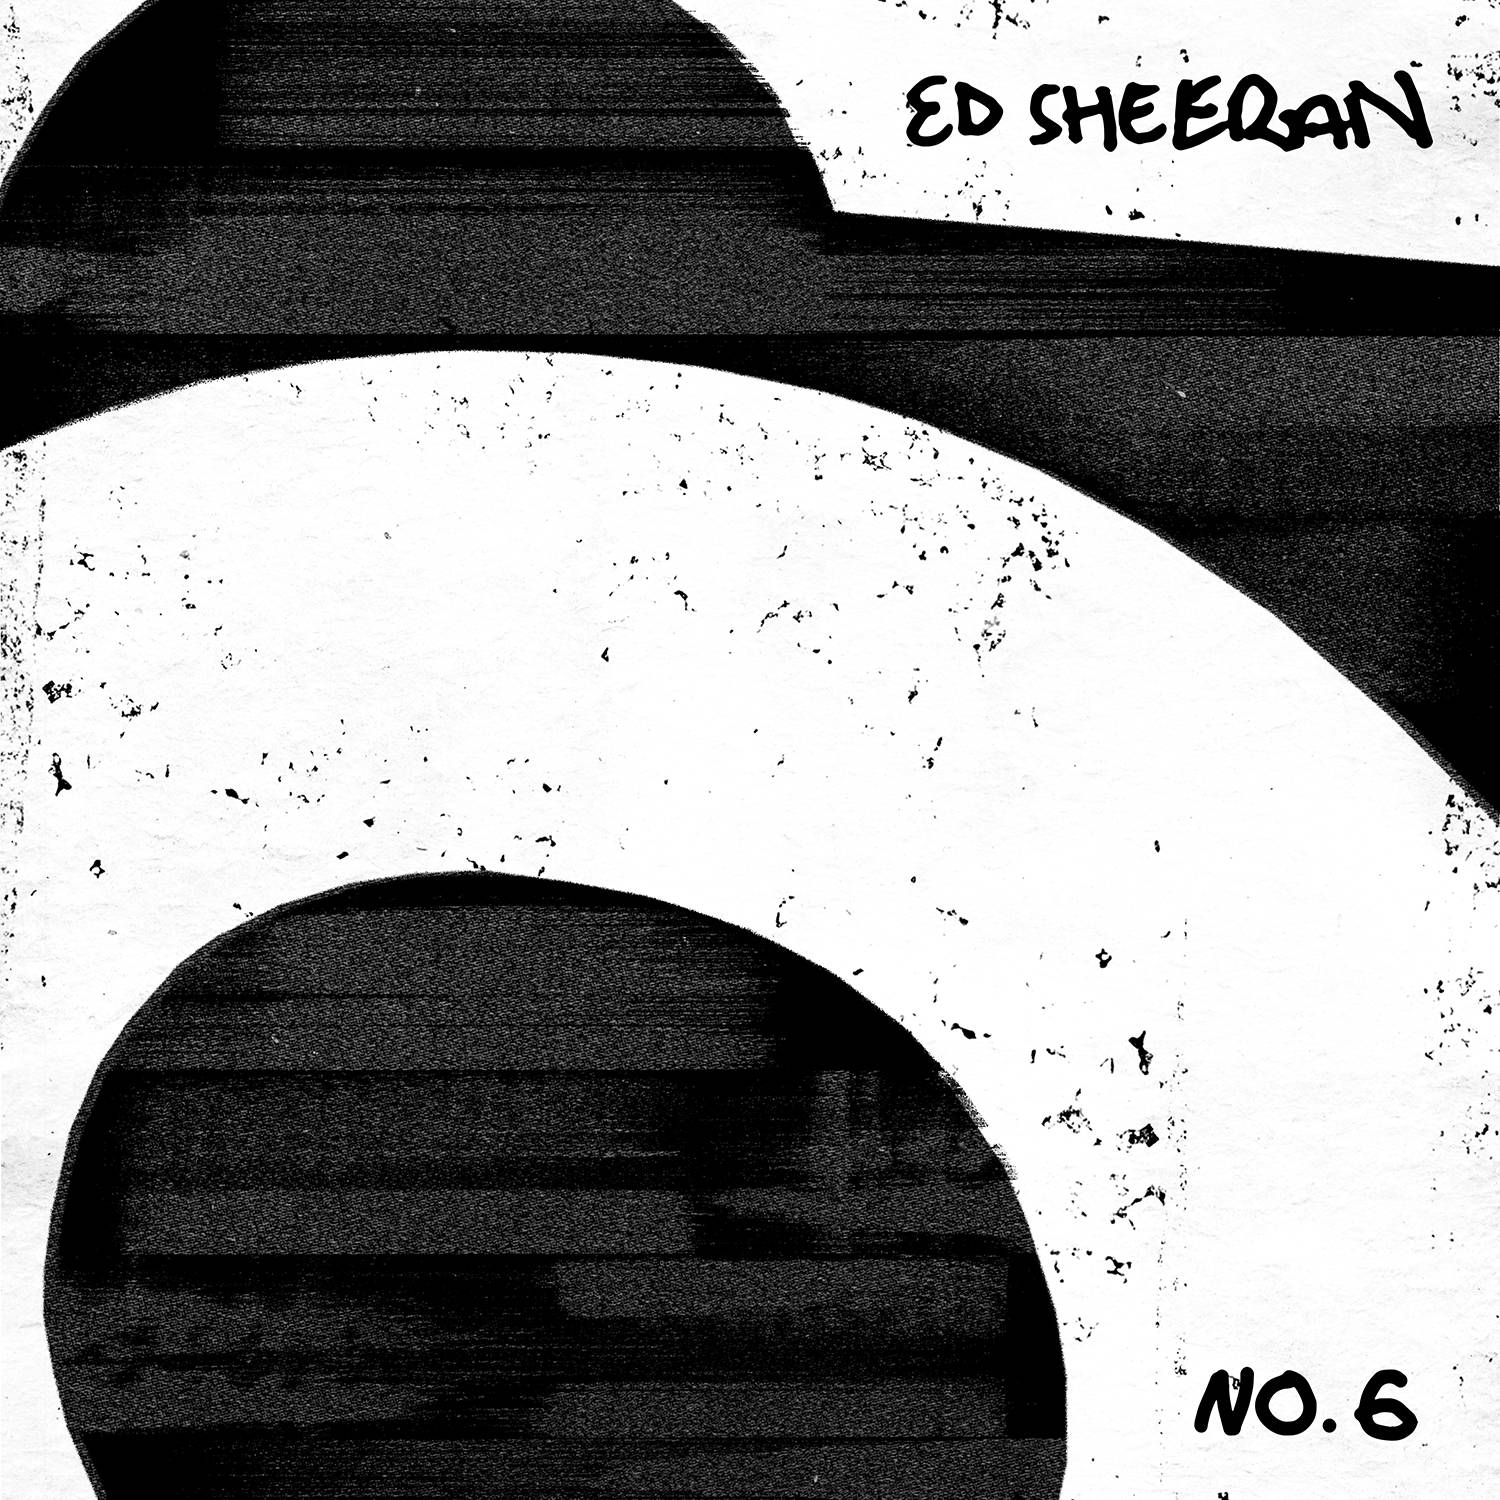 Ed Sheeran surprised fans with a new single for Christmas. Listen to the "Happier" singer perform his latest song.